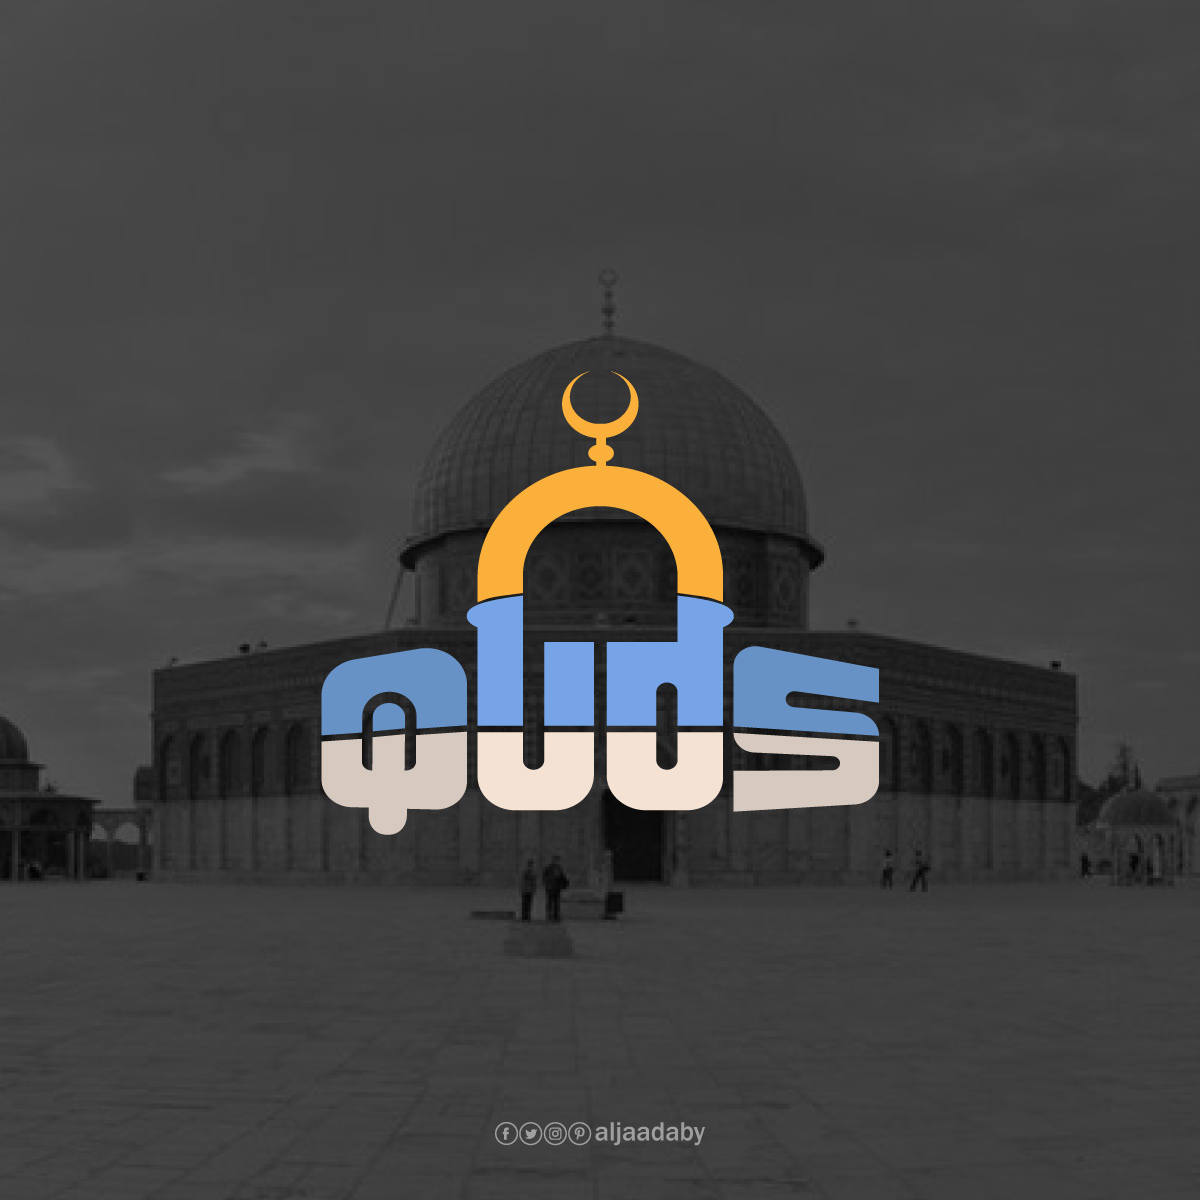 Typographic city logos based on their famous landmarks - Quds